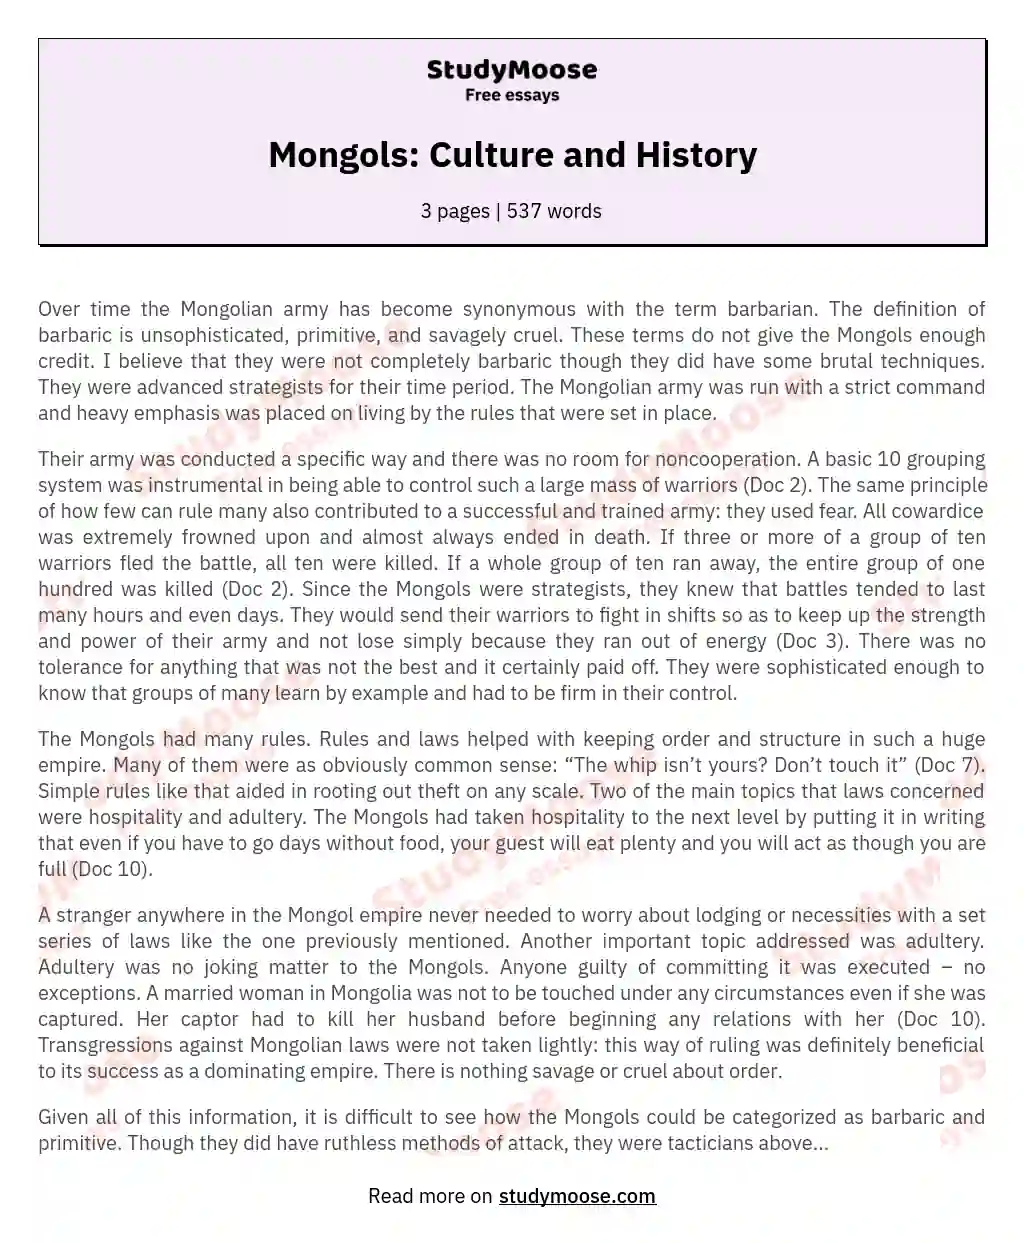 Mongols: Culture and History essay